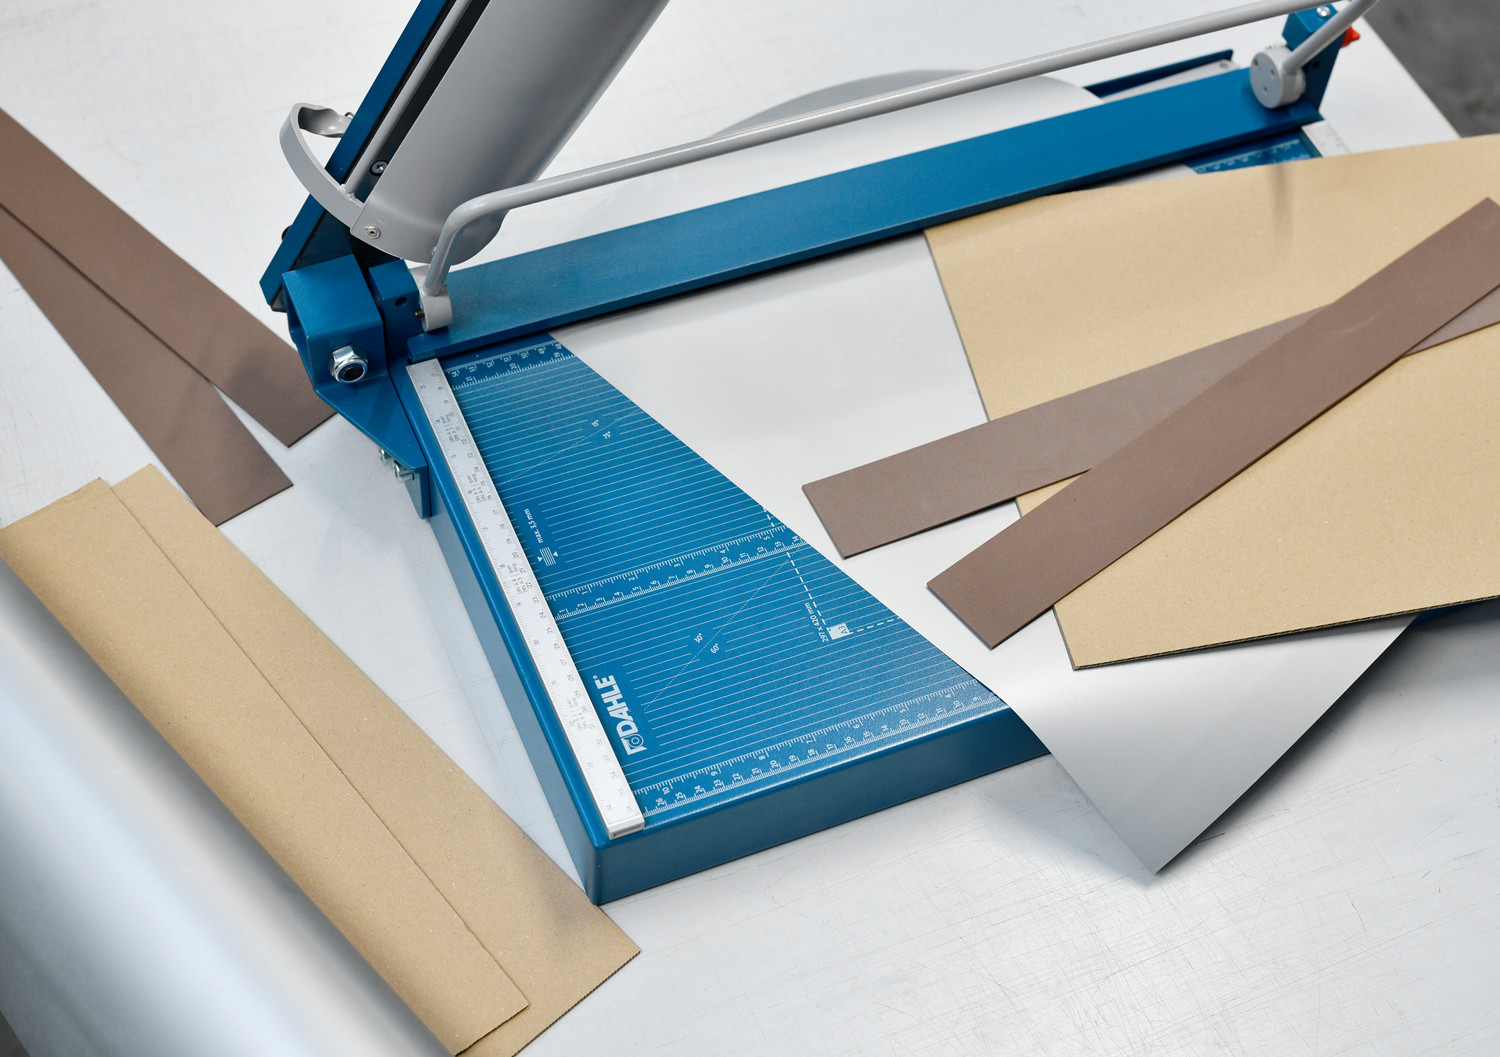 In addition to paper, material blades can cut a wide variety of other materials, such as sheeting, card, fabric, metal or leather